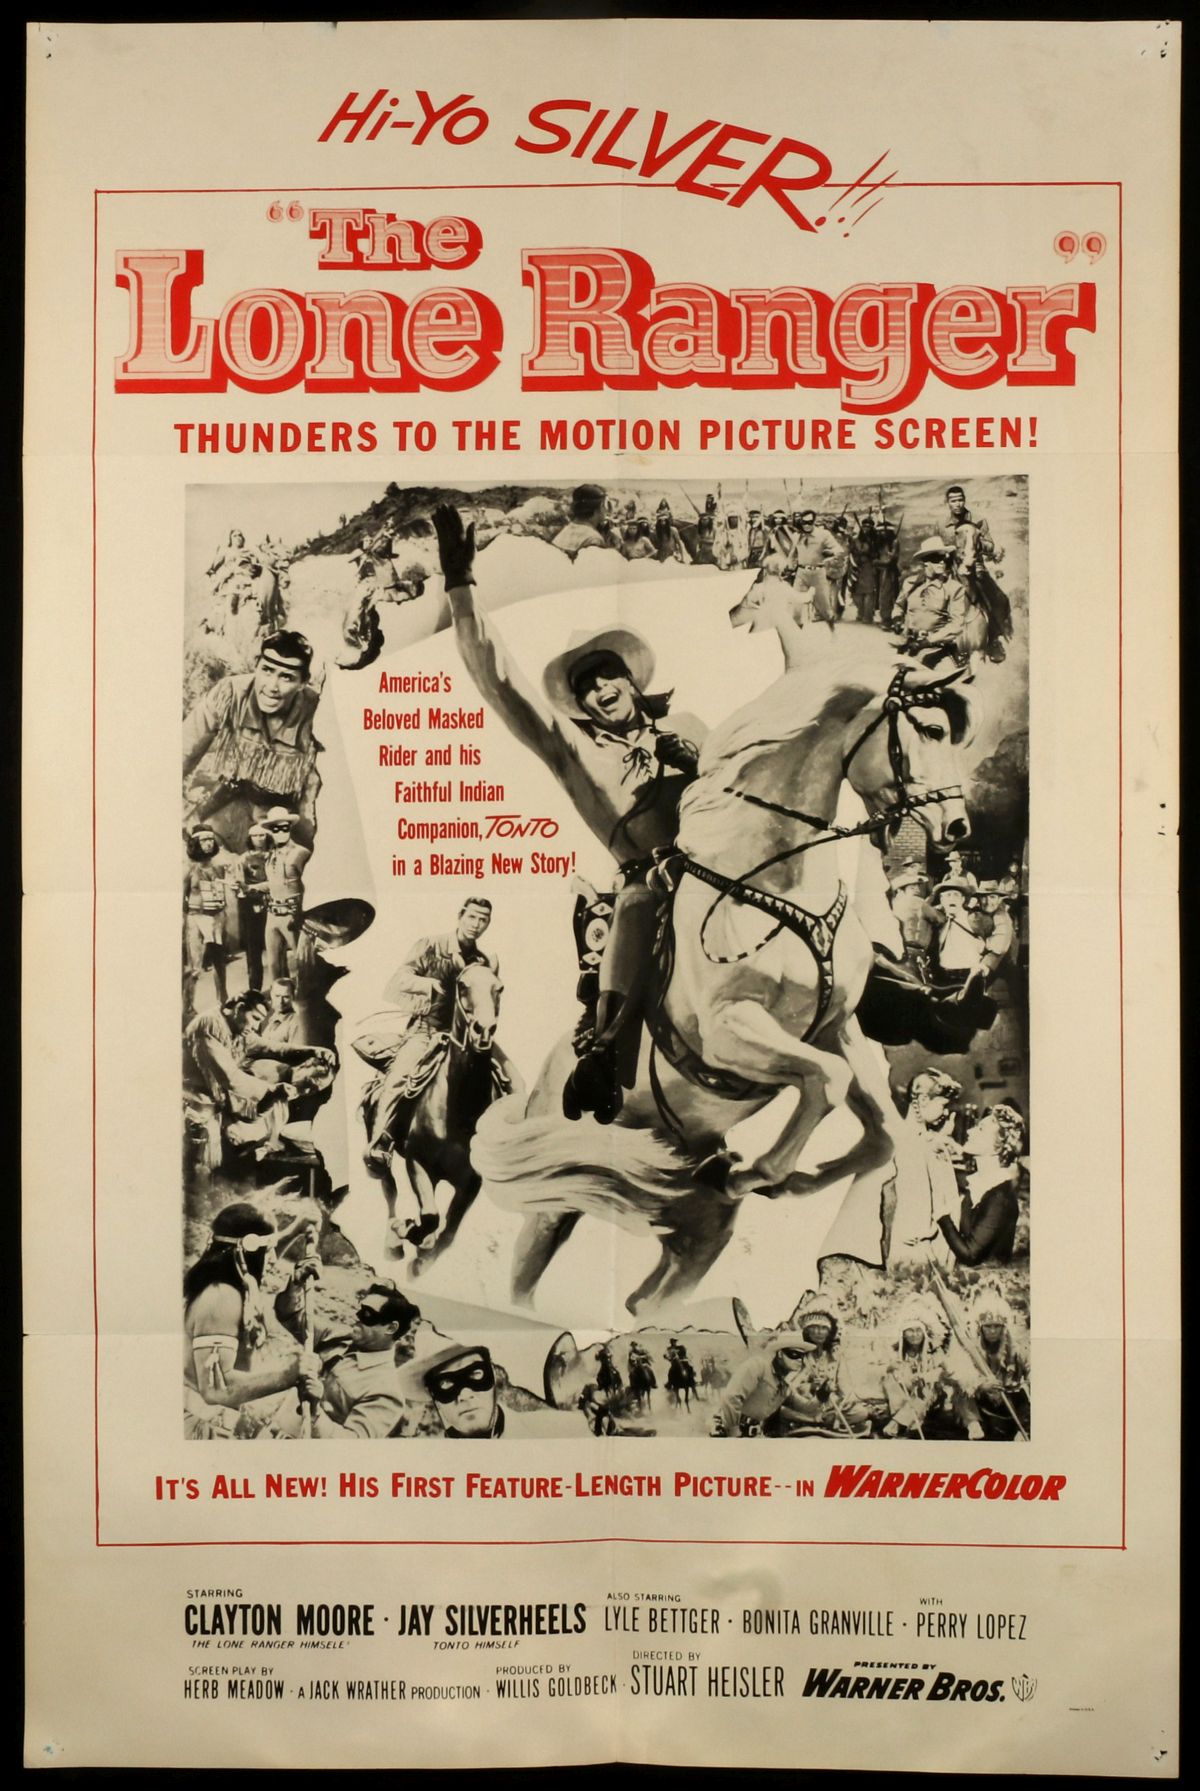 A 1956 'THE LONE RANGER' MOVIE POSTER